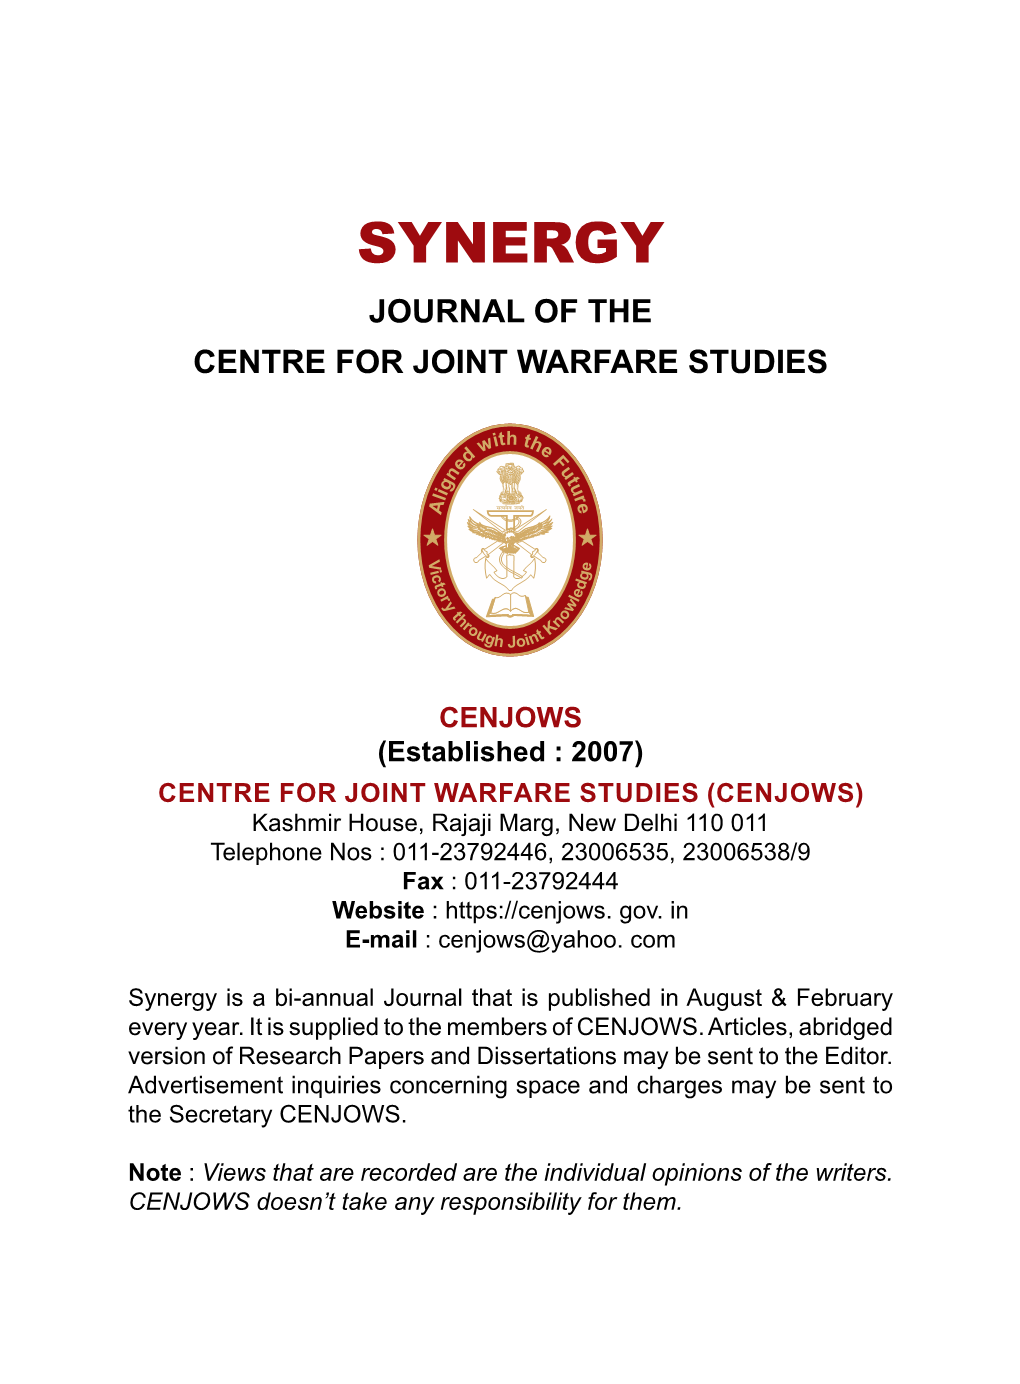 Synergy Journal of the Centre for Joint Warfare Studies